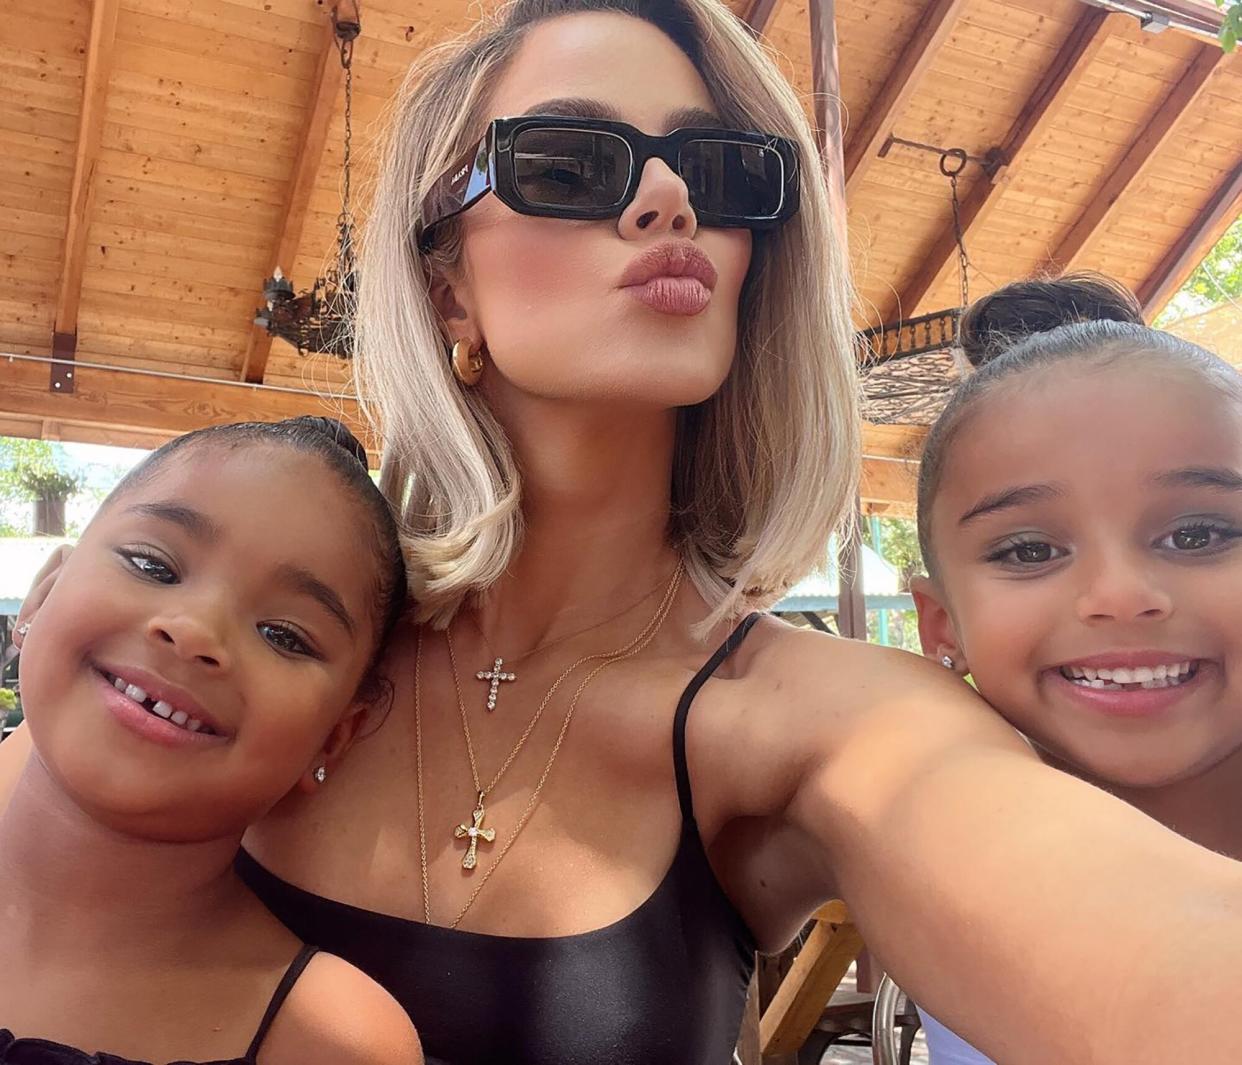 Khloe Kardashian Shares Video of Dream and True’s First Dance Recital: ‘They Were Perfection’. https://www.instagram.com/p/Ce91ChJvQ1x/